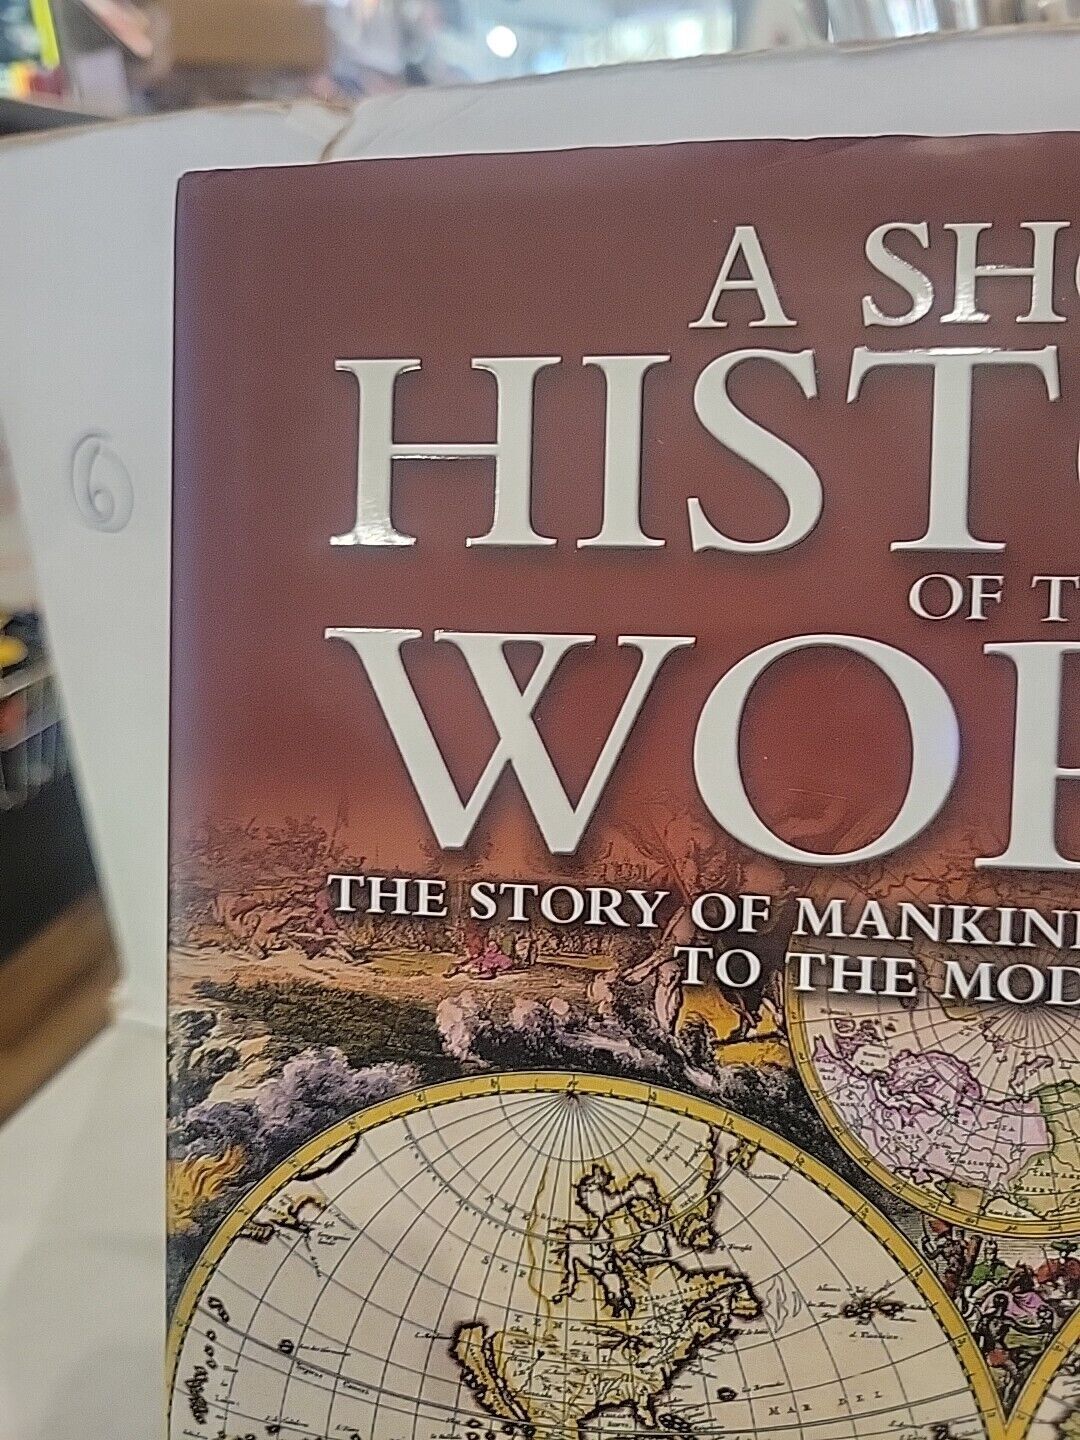 A Short History of the World by Alex Woolf